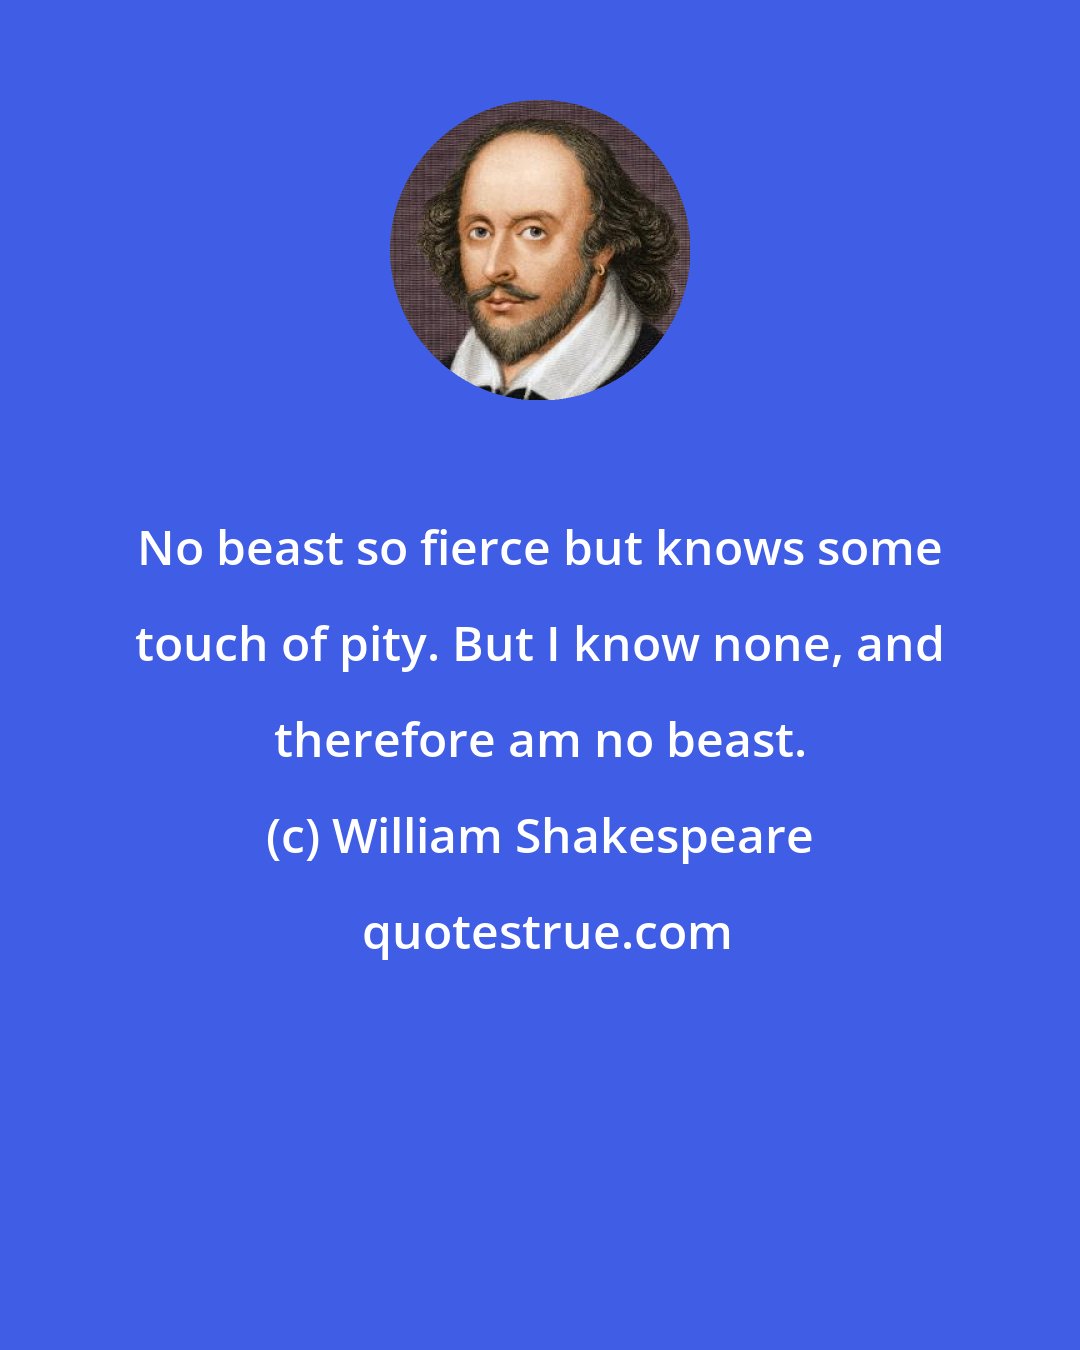 William Shakespeare: No beast so fierce but knows some touch of pity. But I know none, and therefore am no beast.